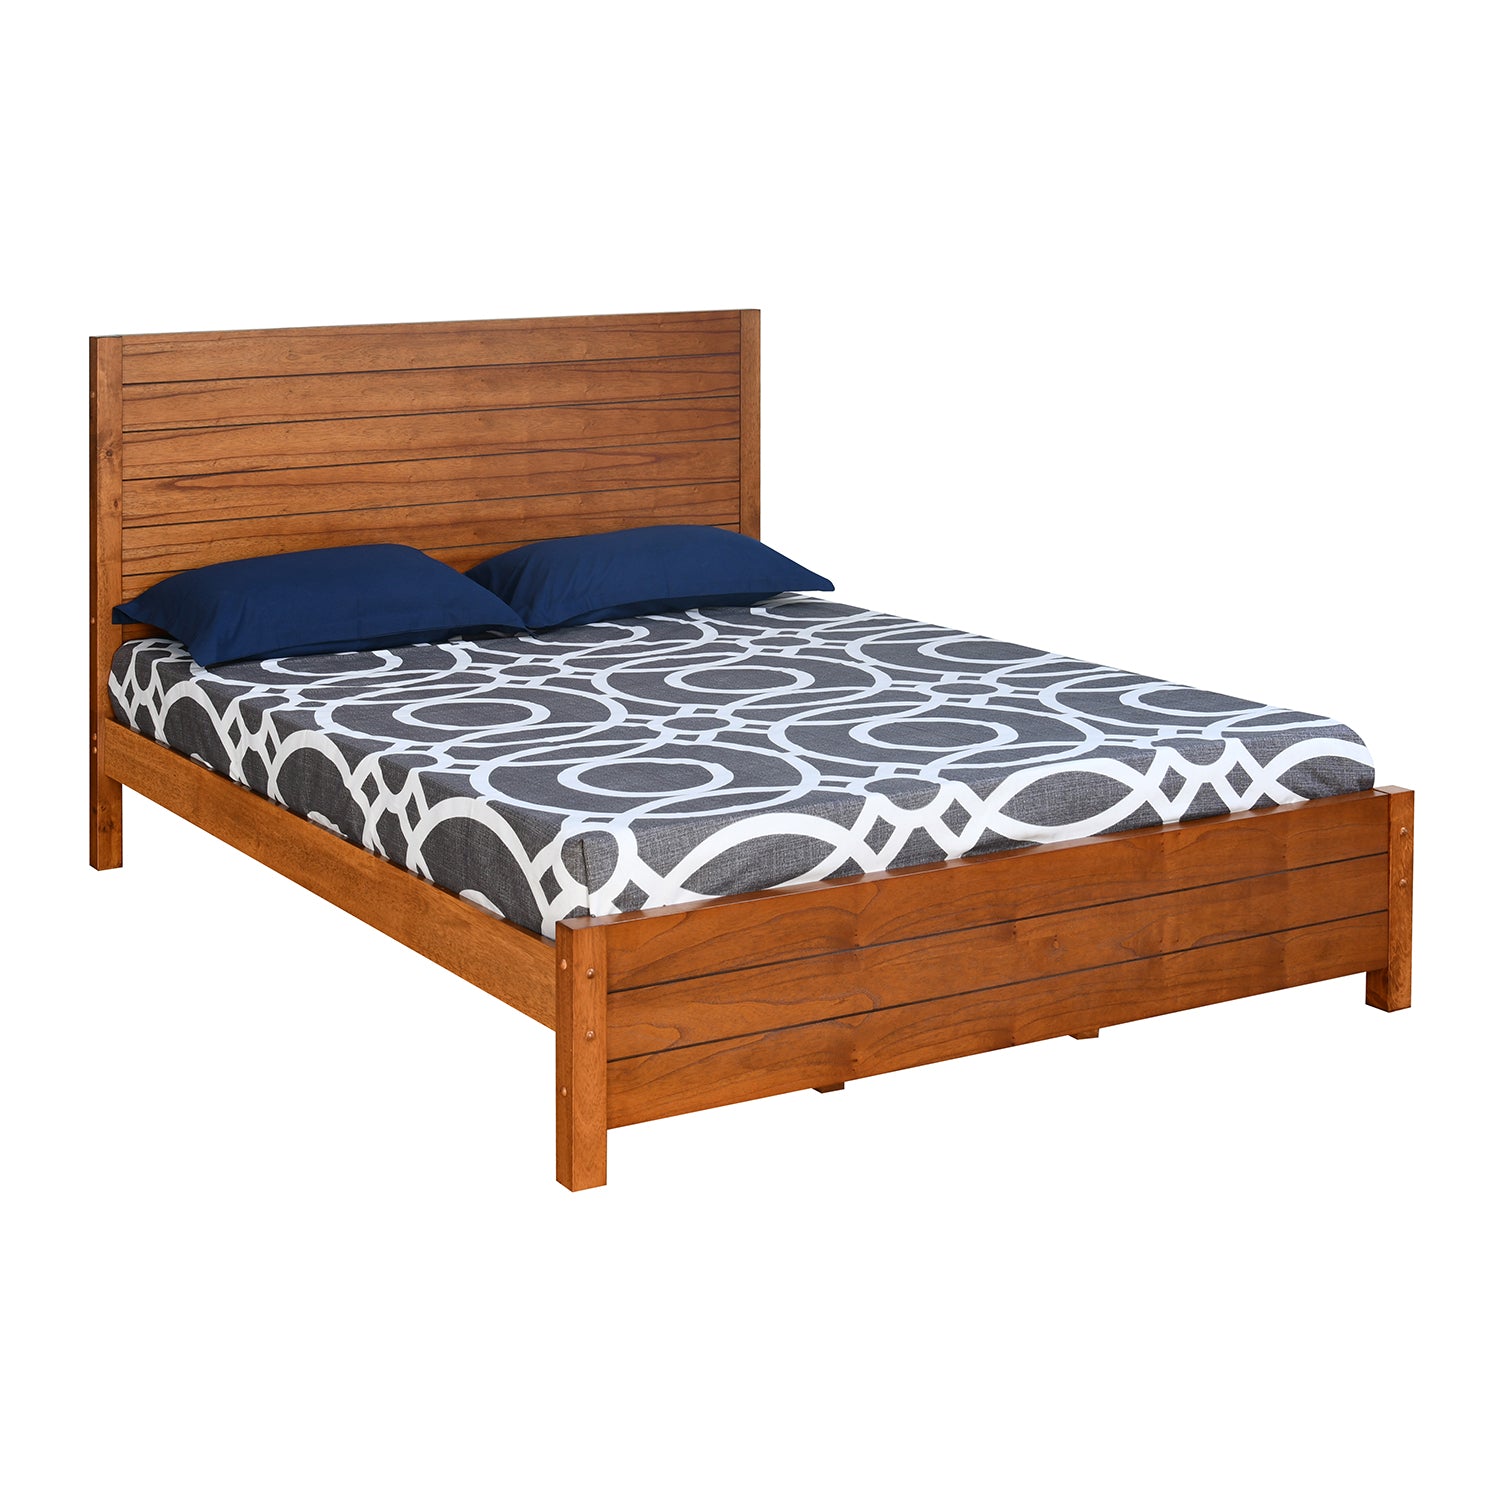 Timberland Solid Wood Queen Bed Without Storage (Wenge)